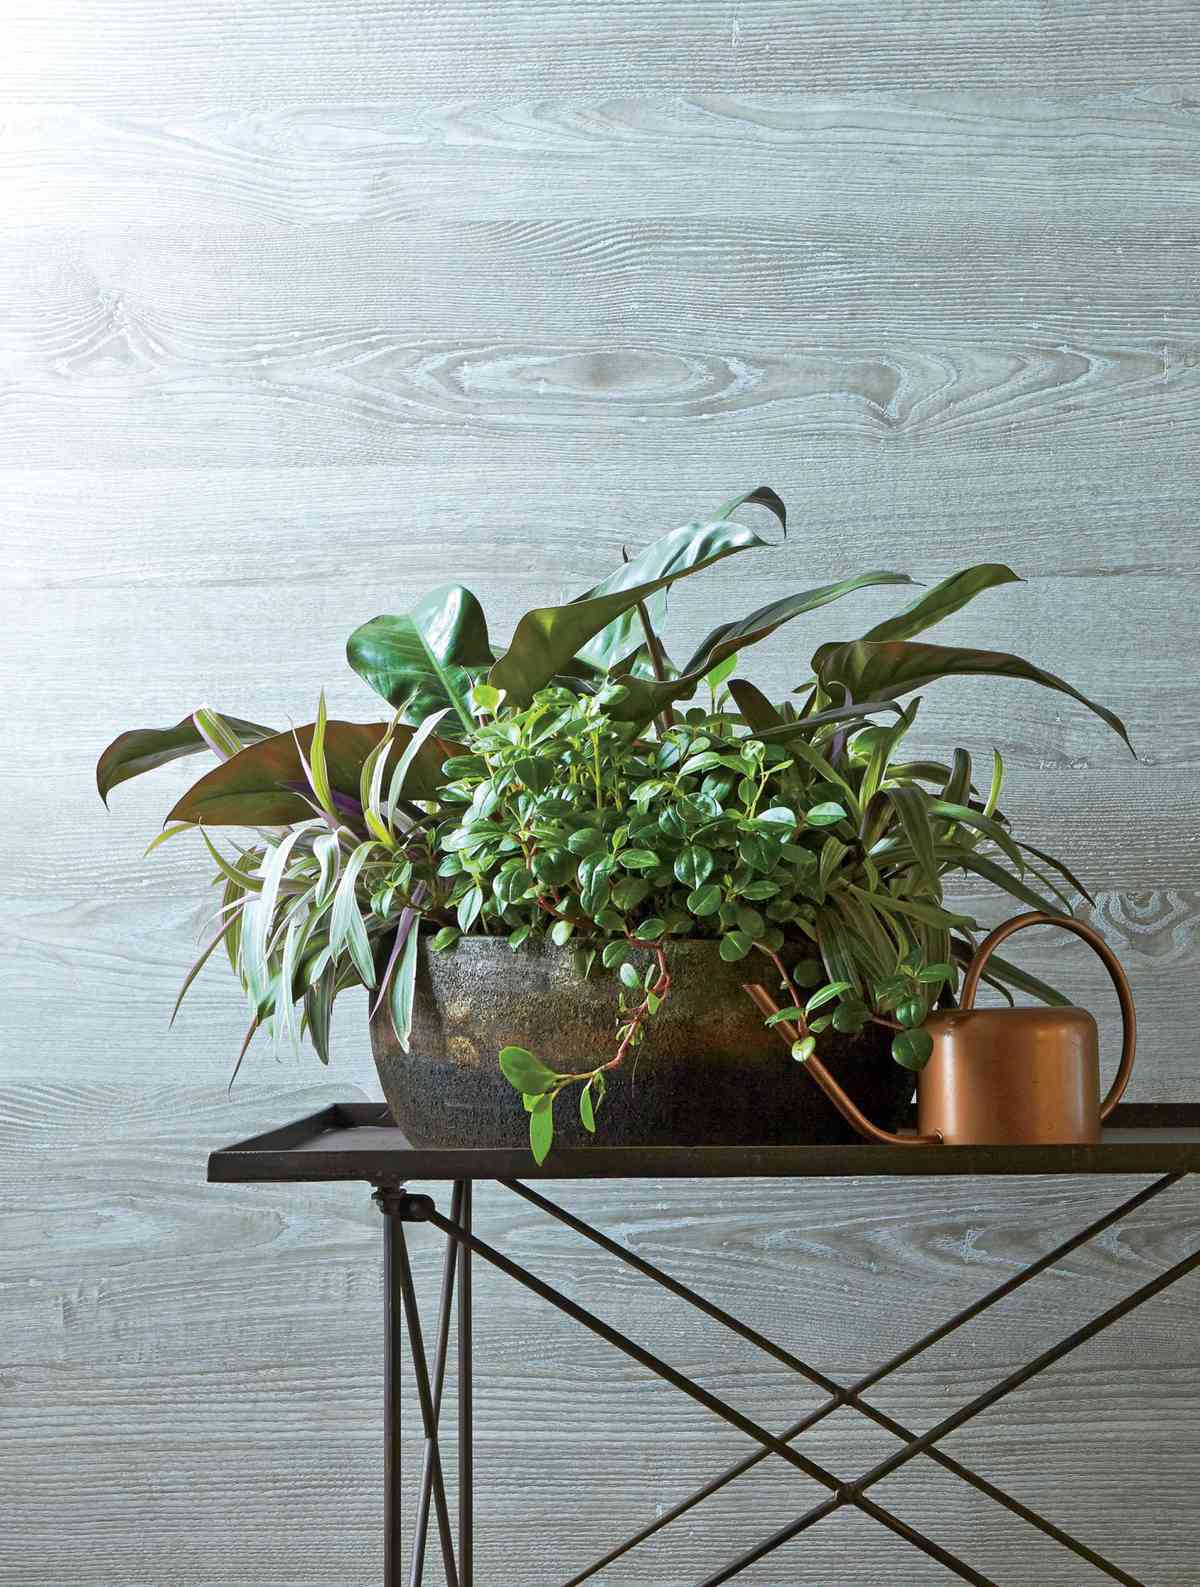 Indoor Container Houseplant: 1. 'Red Dragon' philodendron 2. 'Vittata' oyster plant (Tradescantia spathacea) 3. peperomia